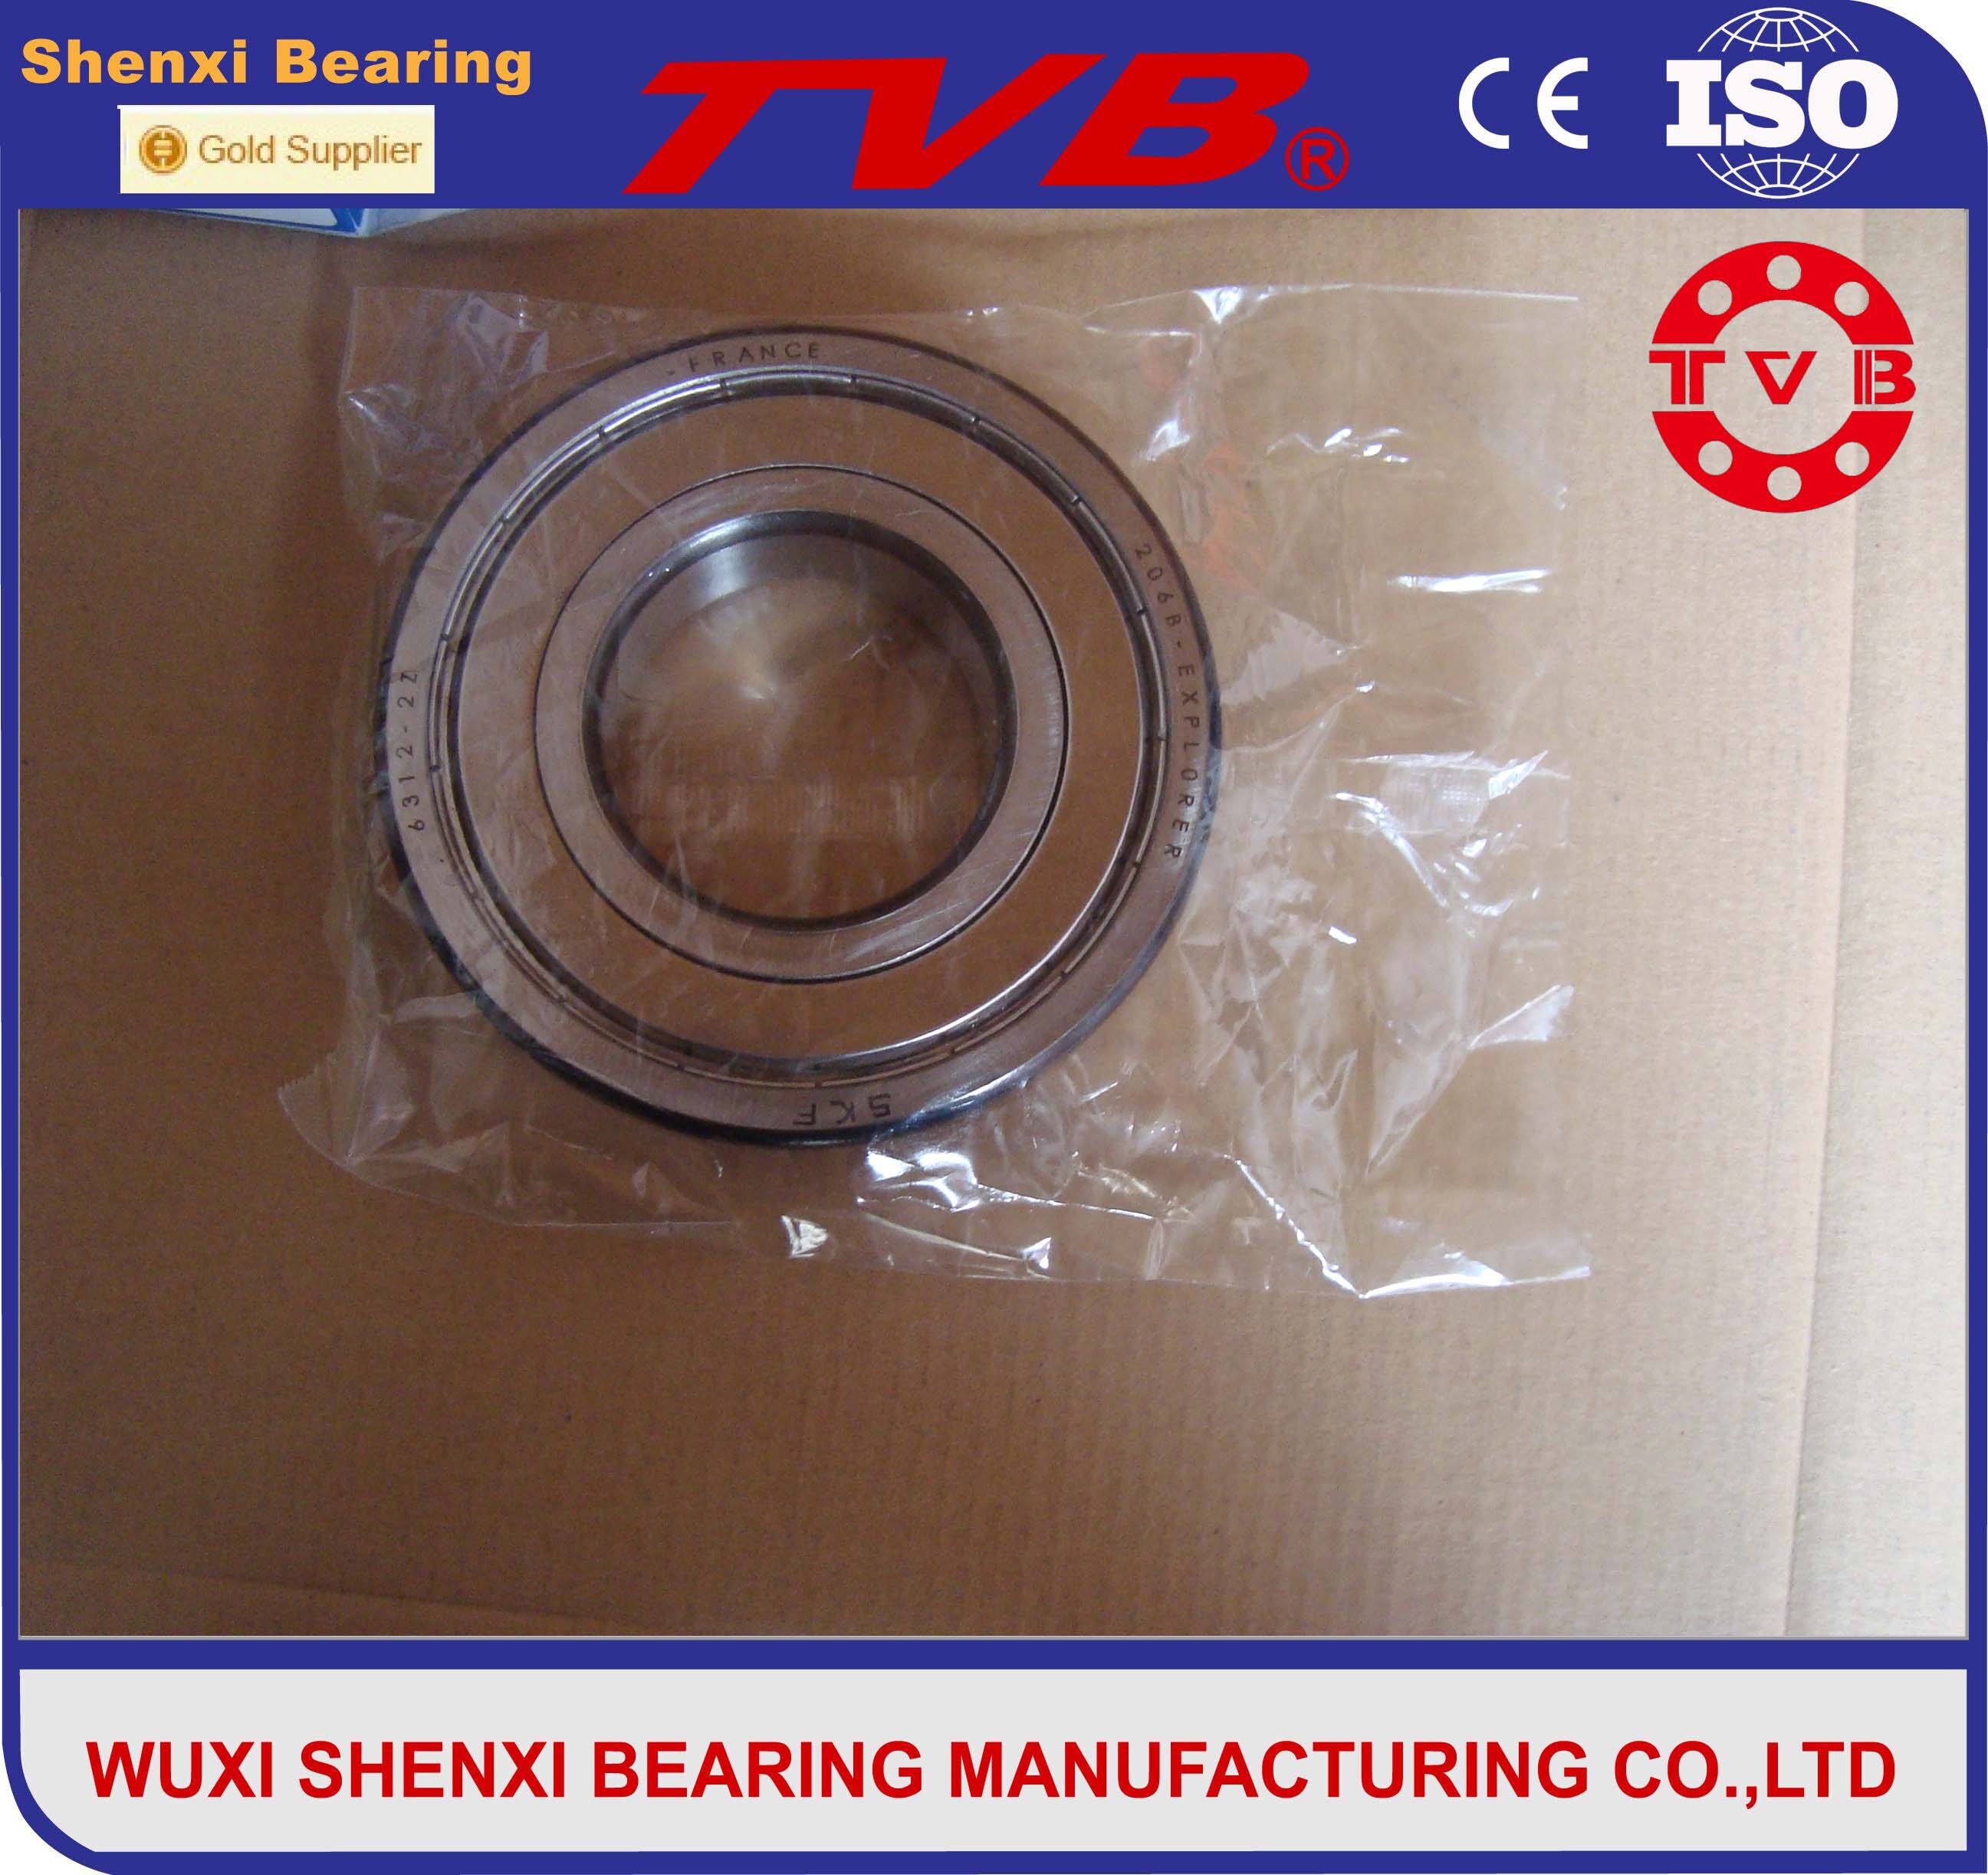 Germany quality Premium steels and heat treatments 6318-2RS/RS/Z/2Z/Z2/Z3 high precision bearing fro